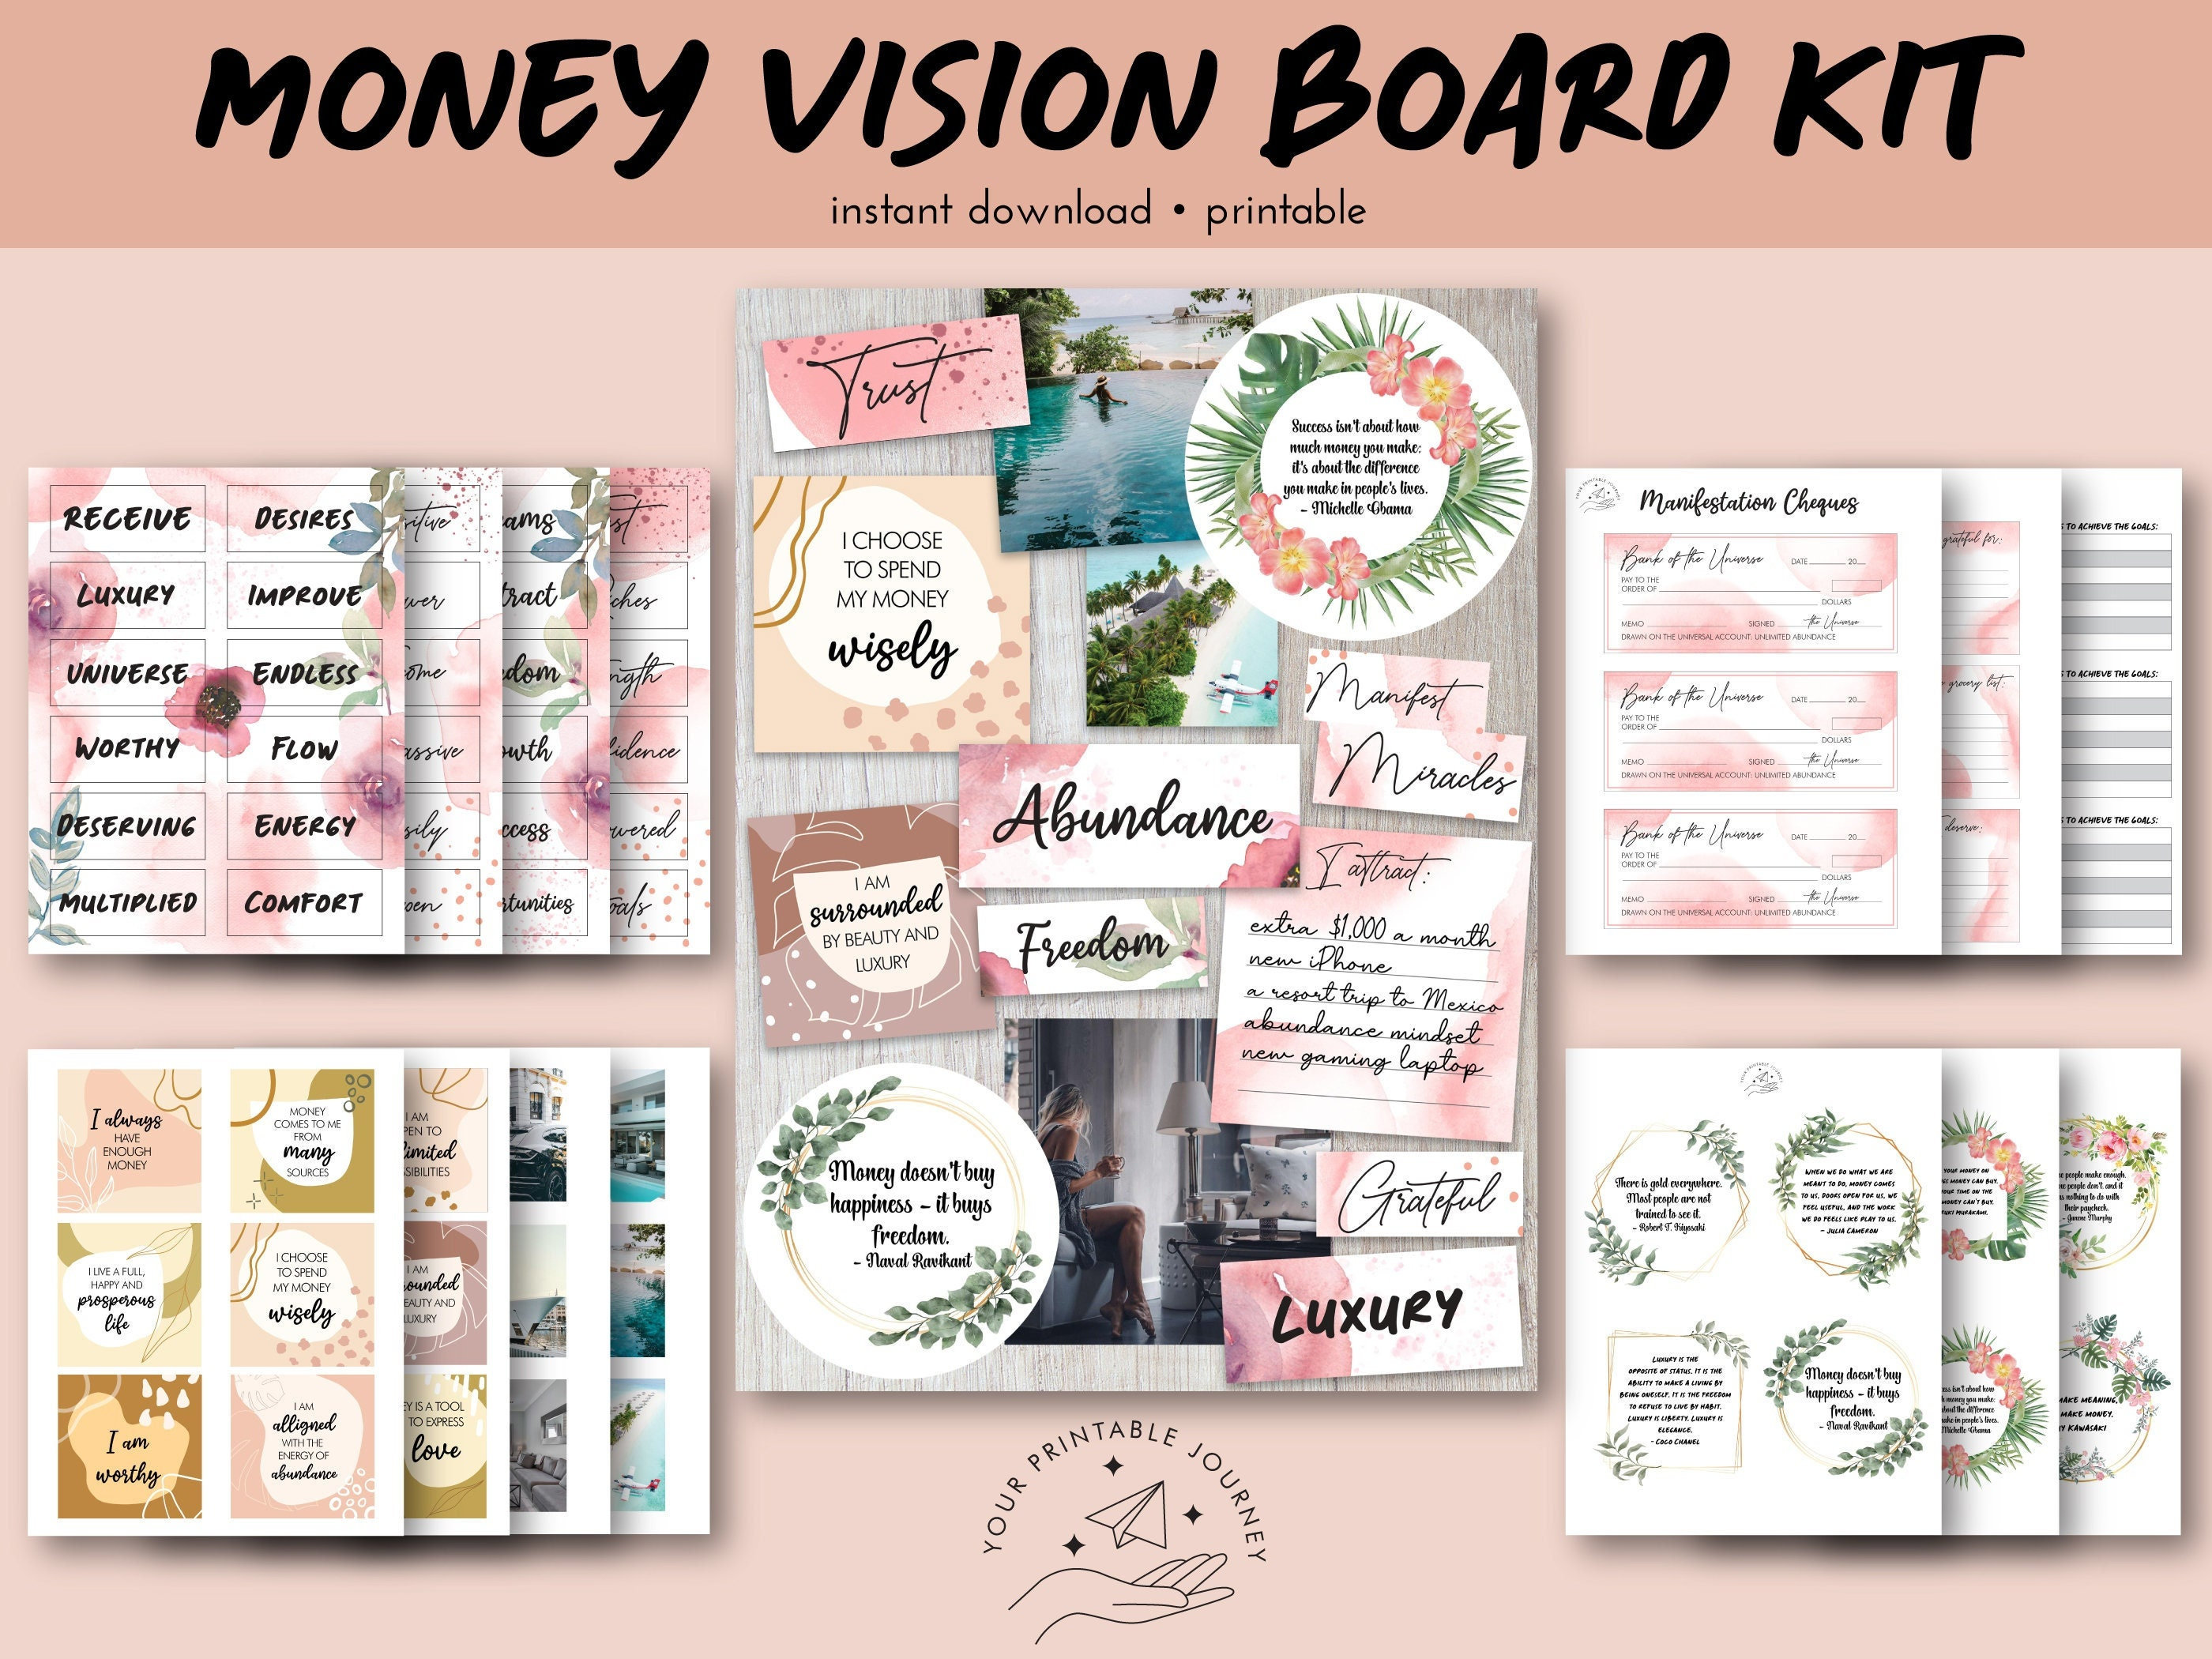 Vision Board Clip Art Book: 200+ Pictures, Words, and Affirmations for Vision  Board Supplies by PuddinG K.P.